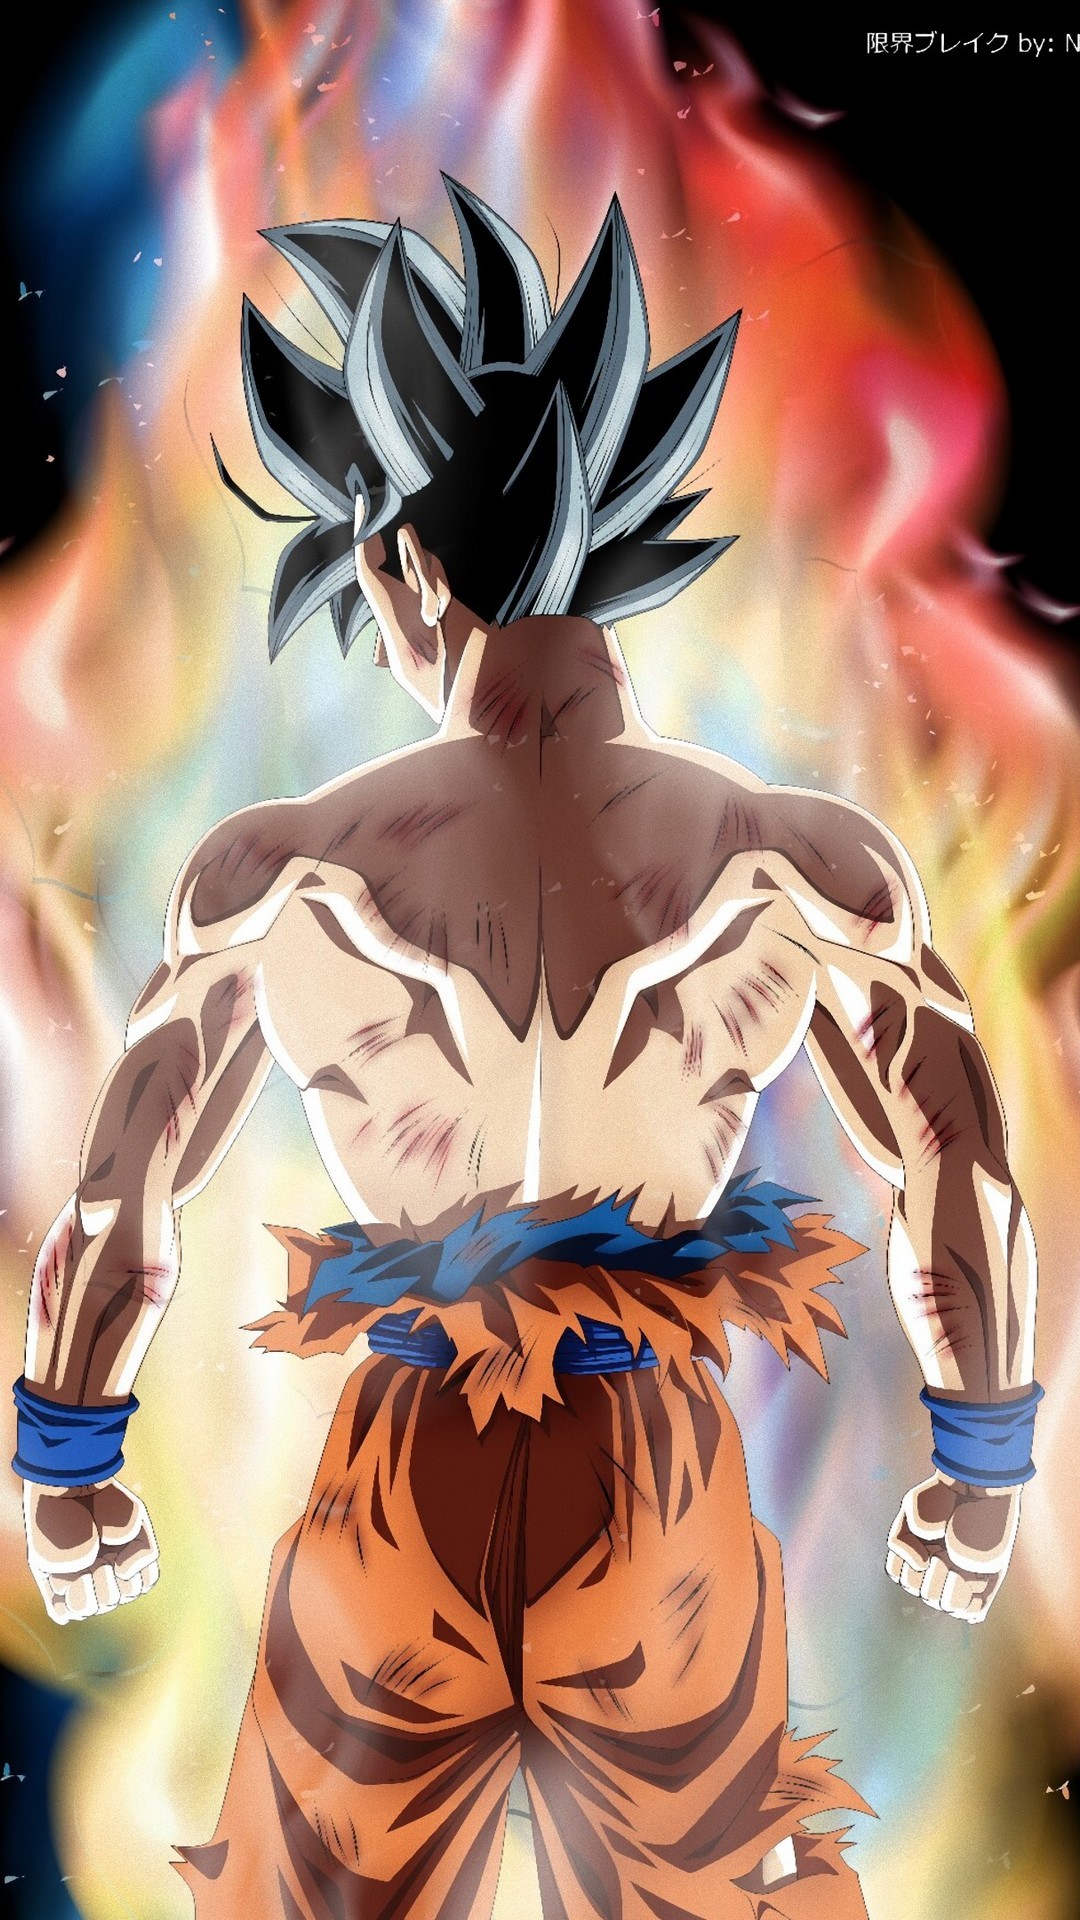 Goku Images Wallpaper iPhone with resolution 1080X1920 pixel. You can make this wallpaper for your iPhone 5, 6, 7, 8, X backgrounds, Mobile Screensaver, or iPad Lock Screen